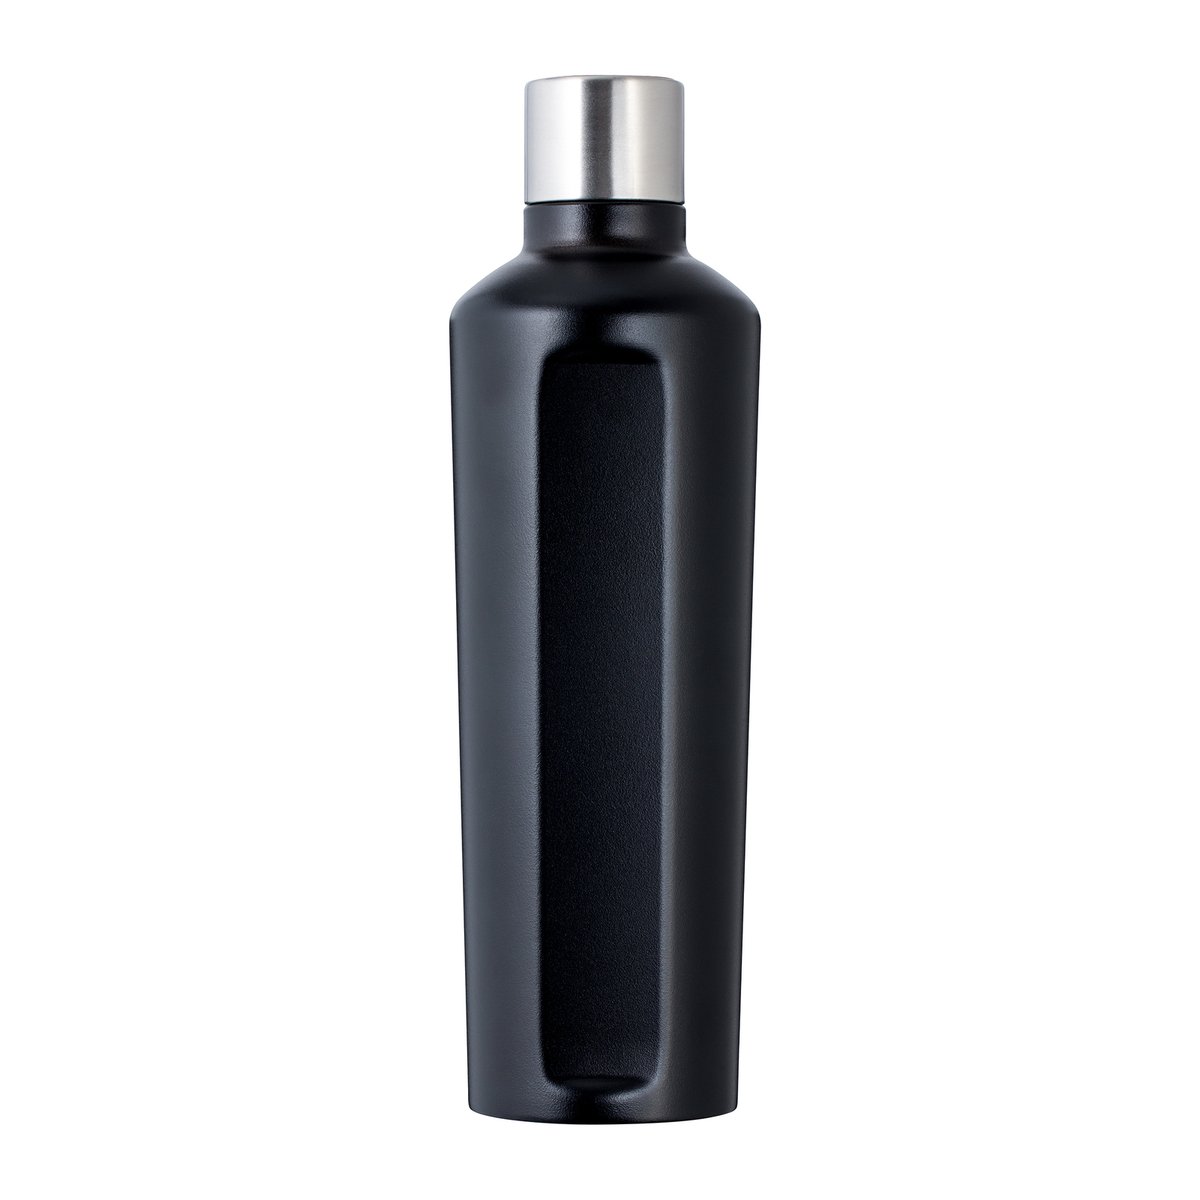 Bouteille isotherme RETUMBLER-STEELONE noir